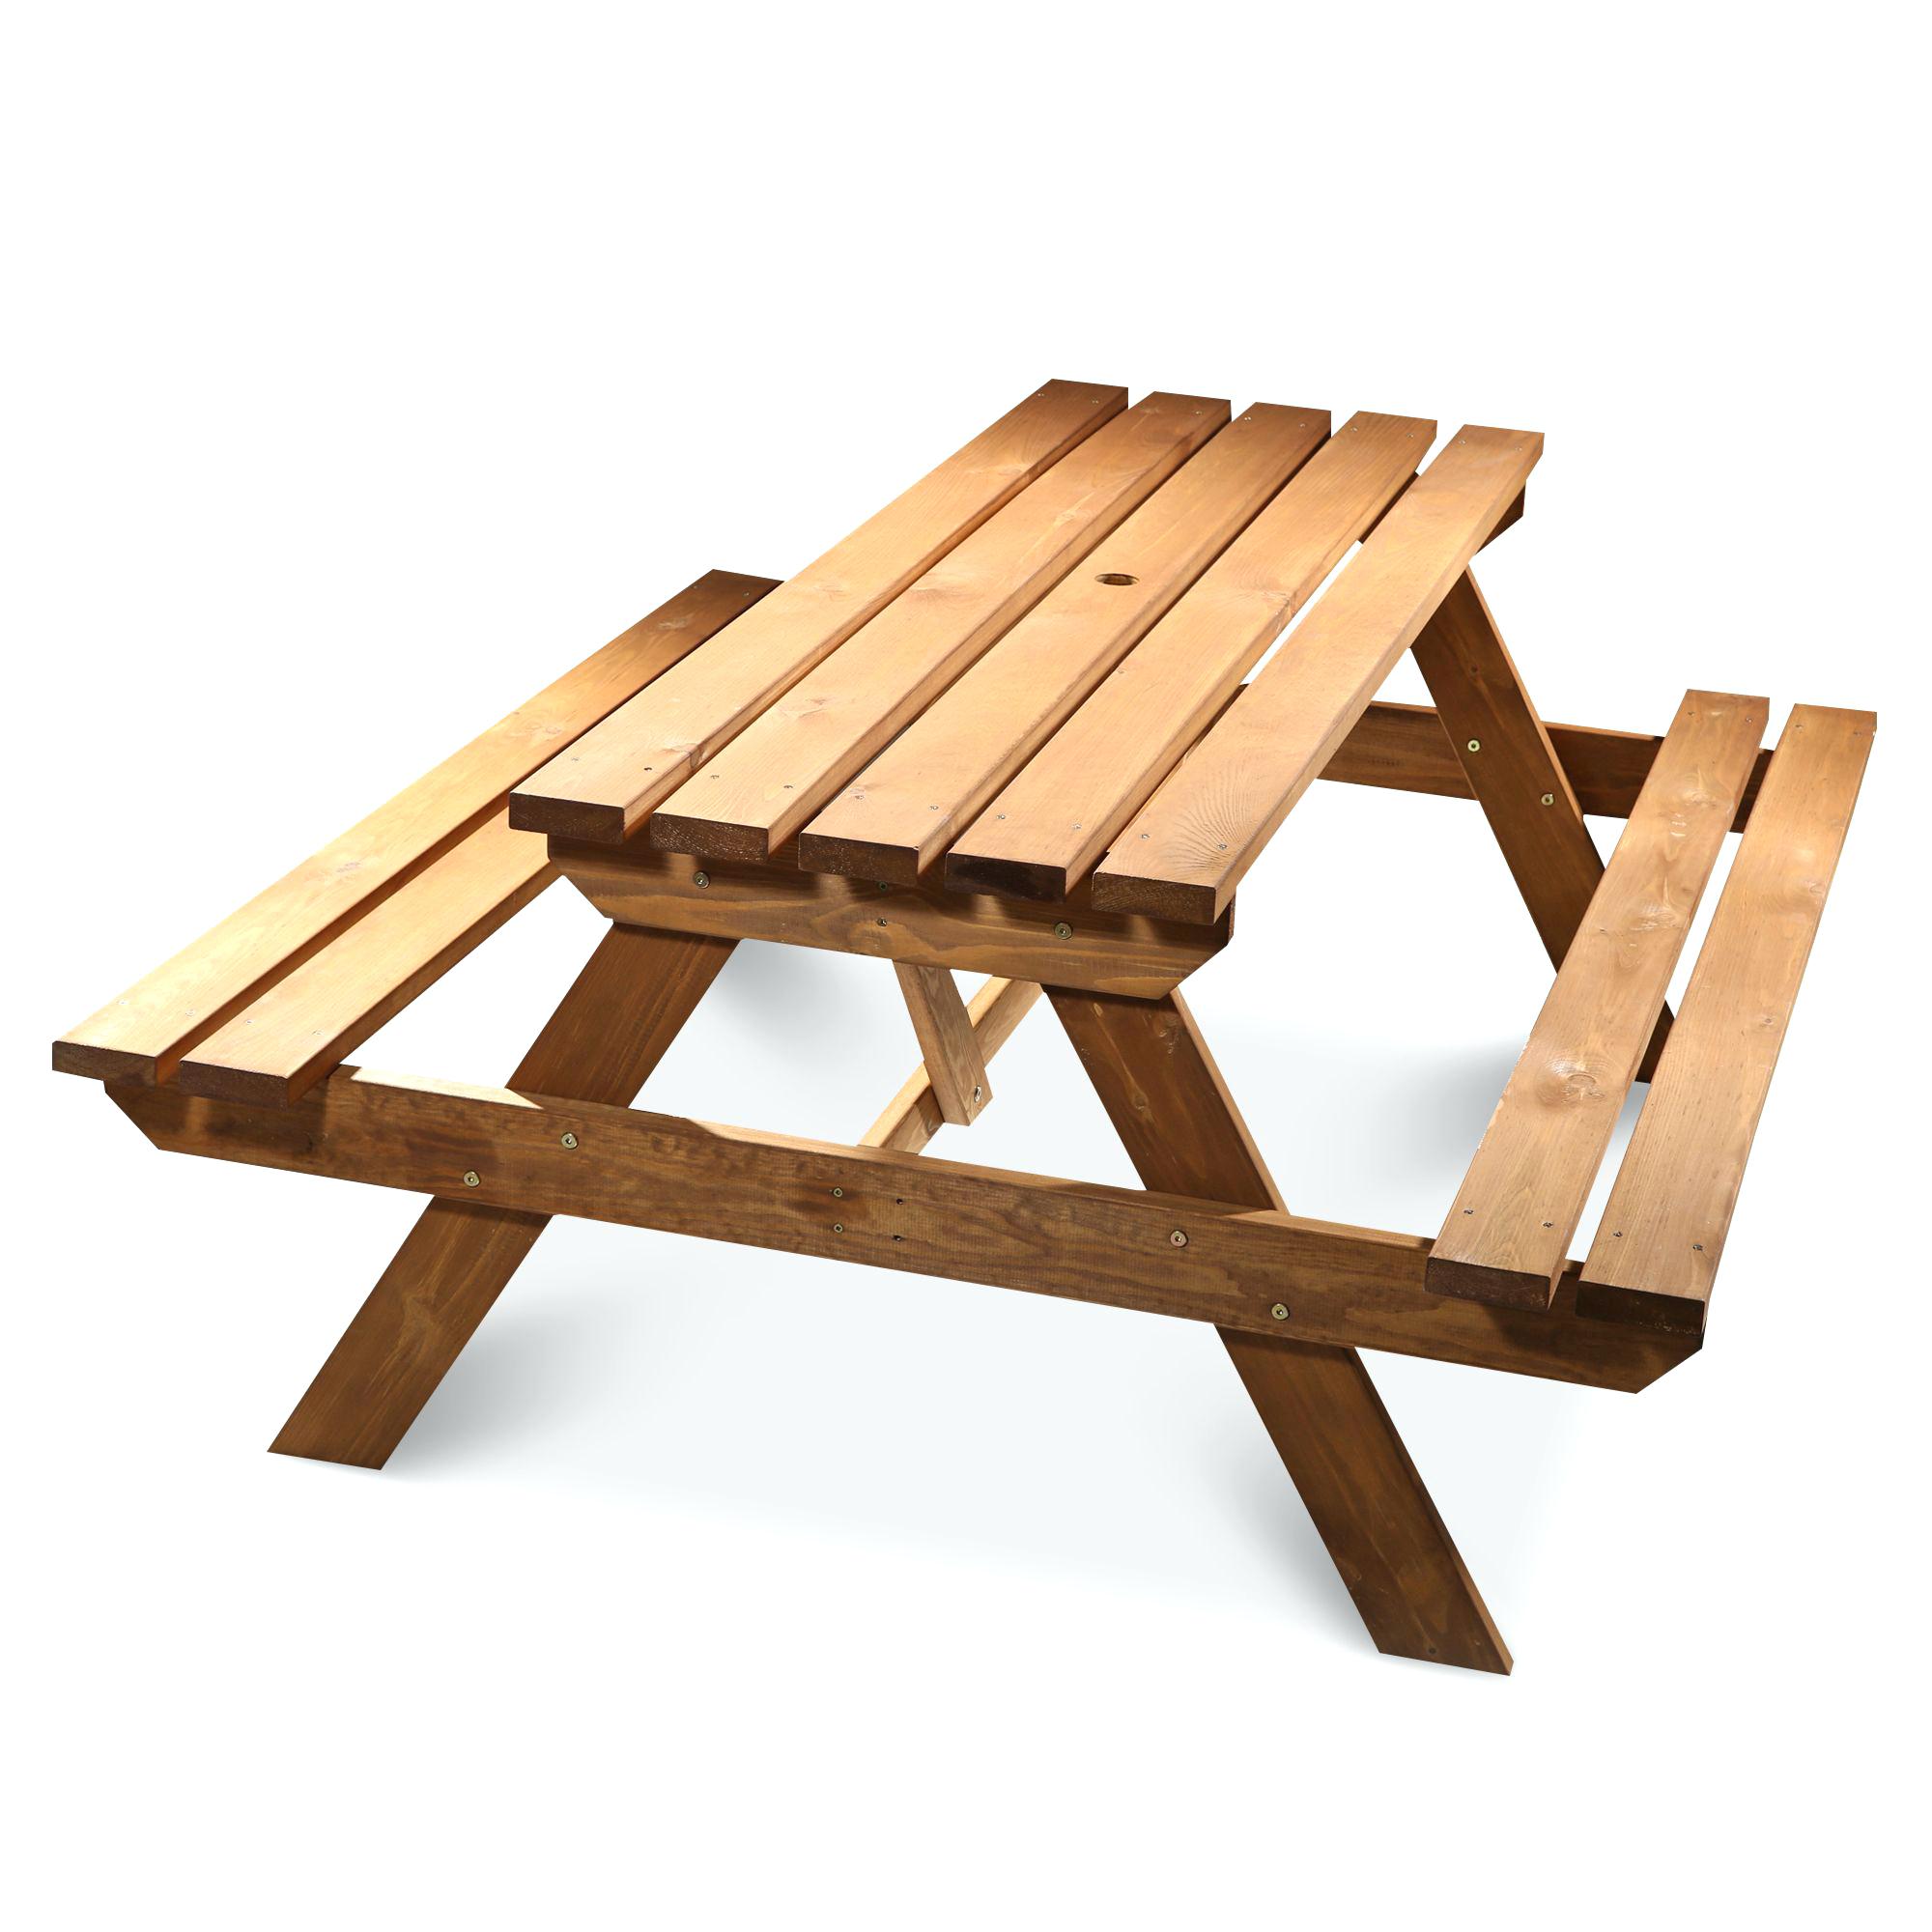 Top 50 Peerless Es Picnic Benches For Sale Perth Johannesburg Cheap ...